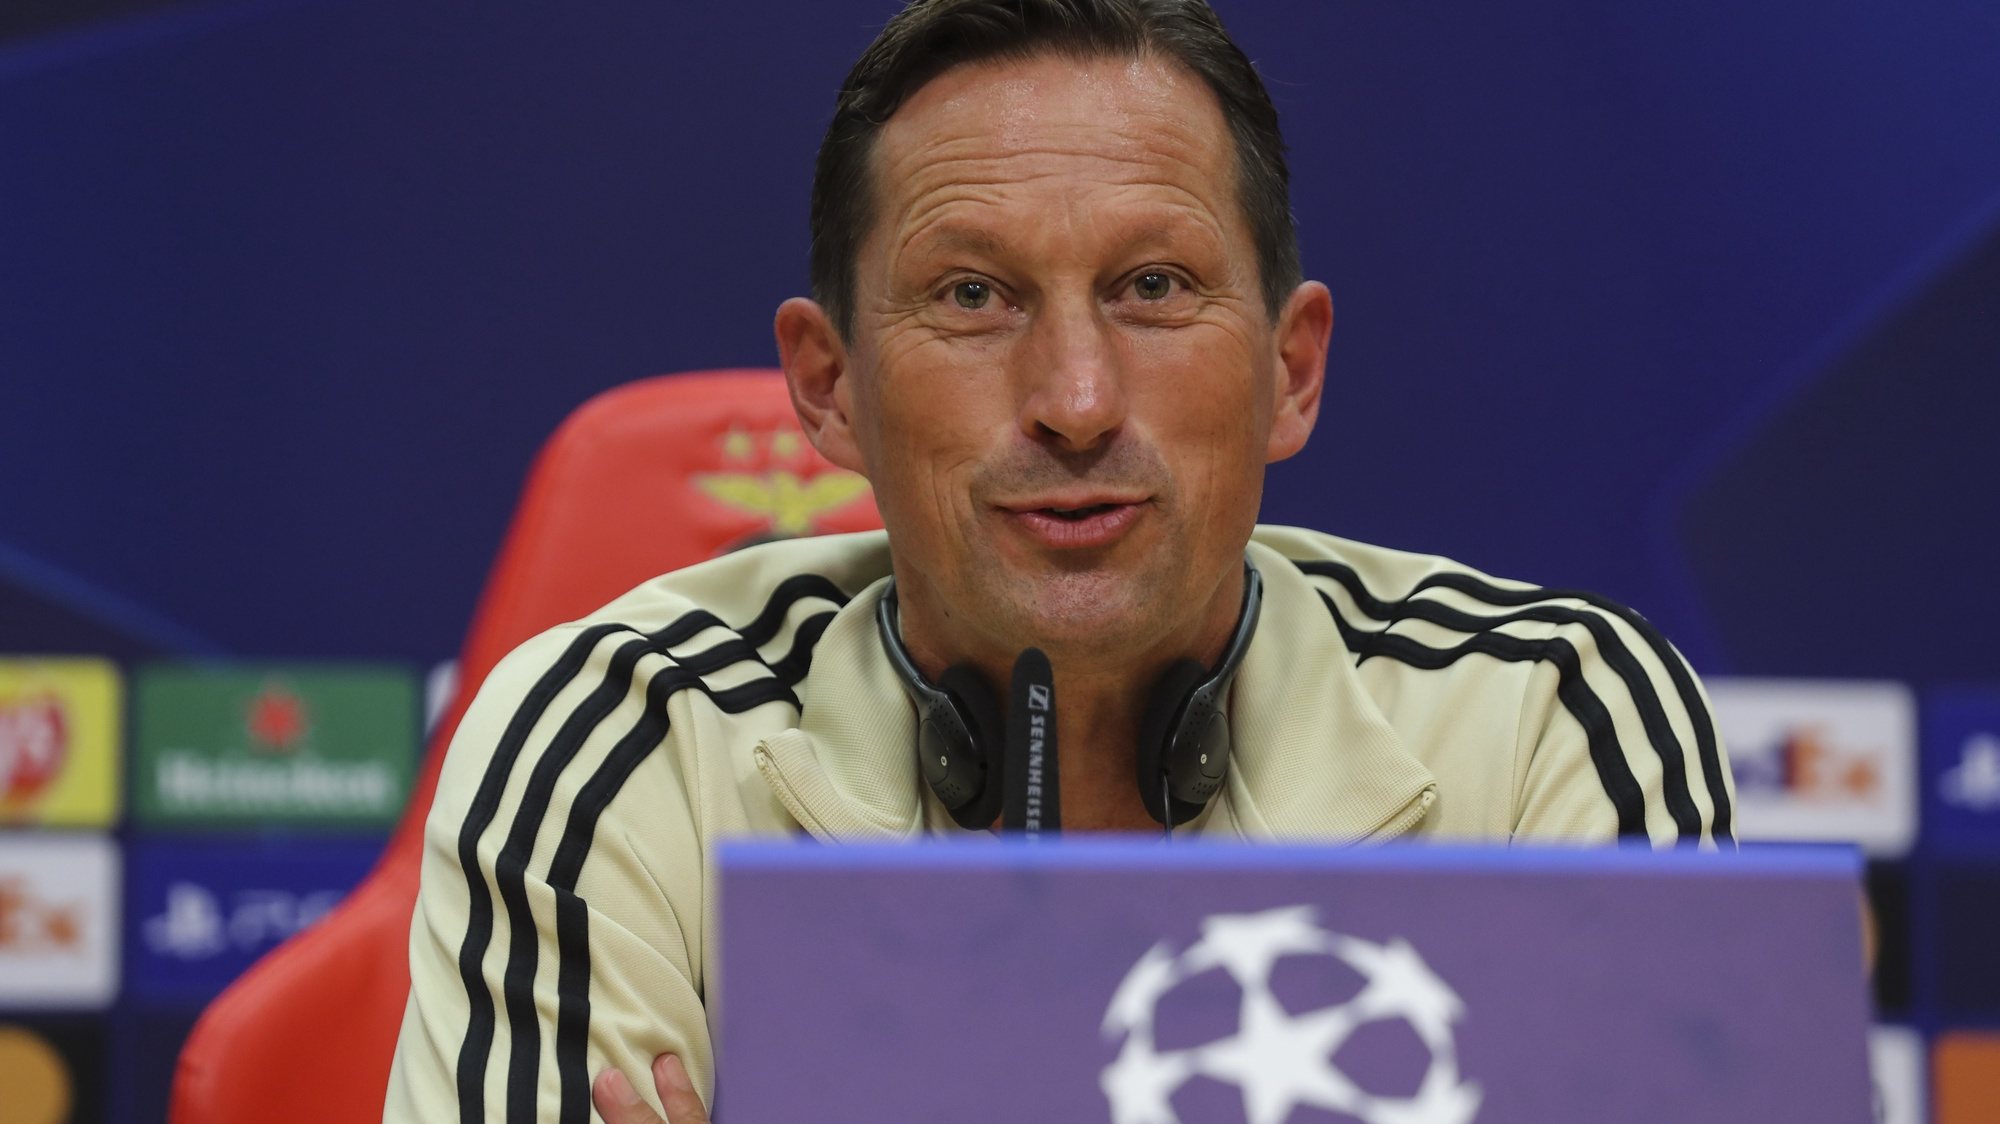 Benfica head coach Roger Schmidt speaks during the press conference at campus in Seixal prior to tomorrow 2nd leg of the UEFA Champions League play-off round against Dynamo Kiev at Luz Stadium in Lisbon. 22 of August 2022. MIGUEL A. LOPES/LUSA